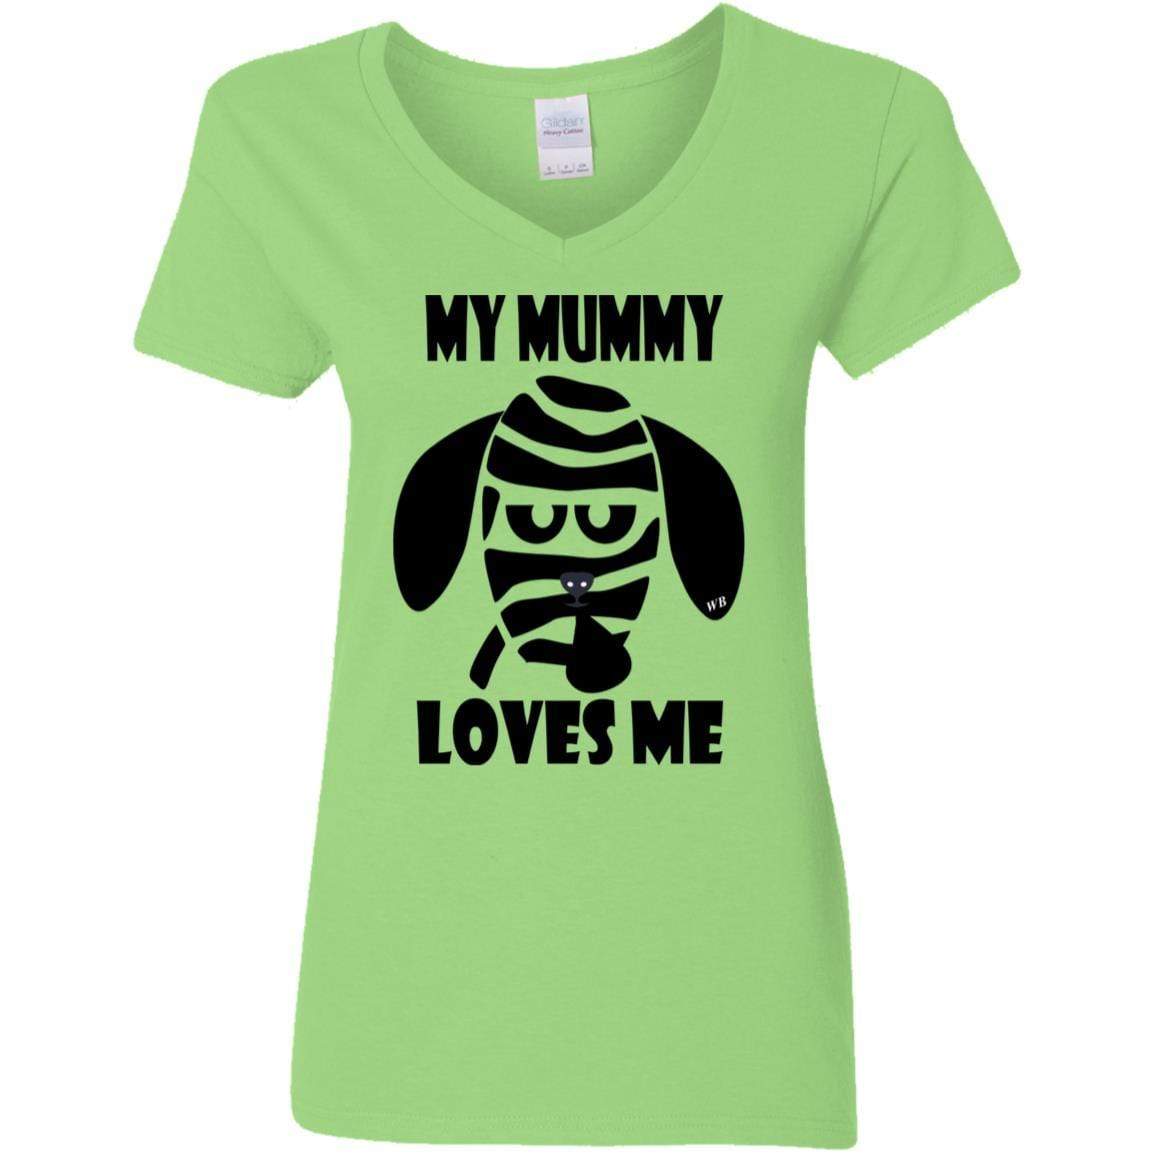 T-Shirts Lime / S WineyBitches.Co "My Mummy Loves Me" Halloween Ladies' 5.3 oz. V-Neck T-Shirt WineyBitchesCo